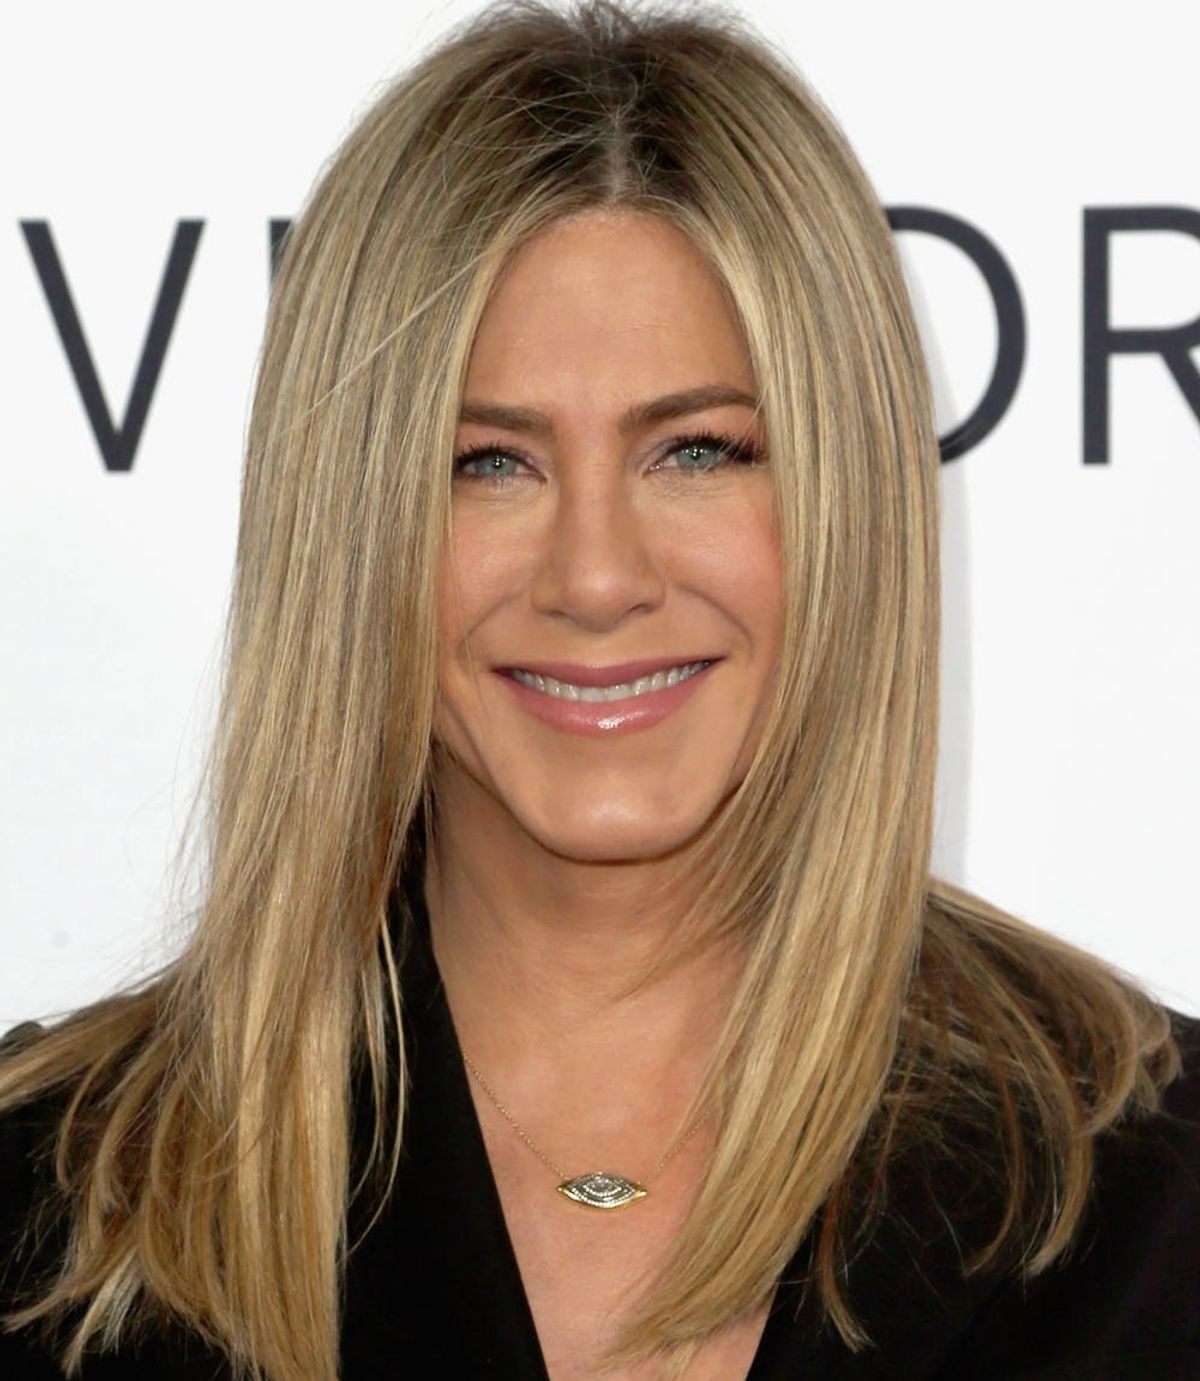 A Celebrity Nutritionist Takes a Closer Look at Jen Aniston’s Diet